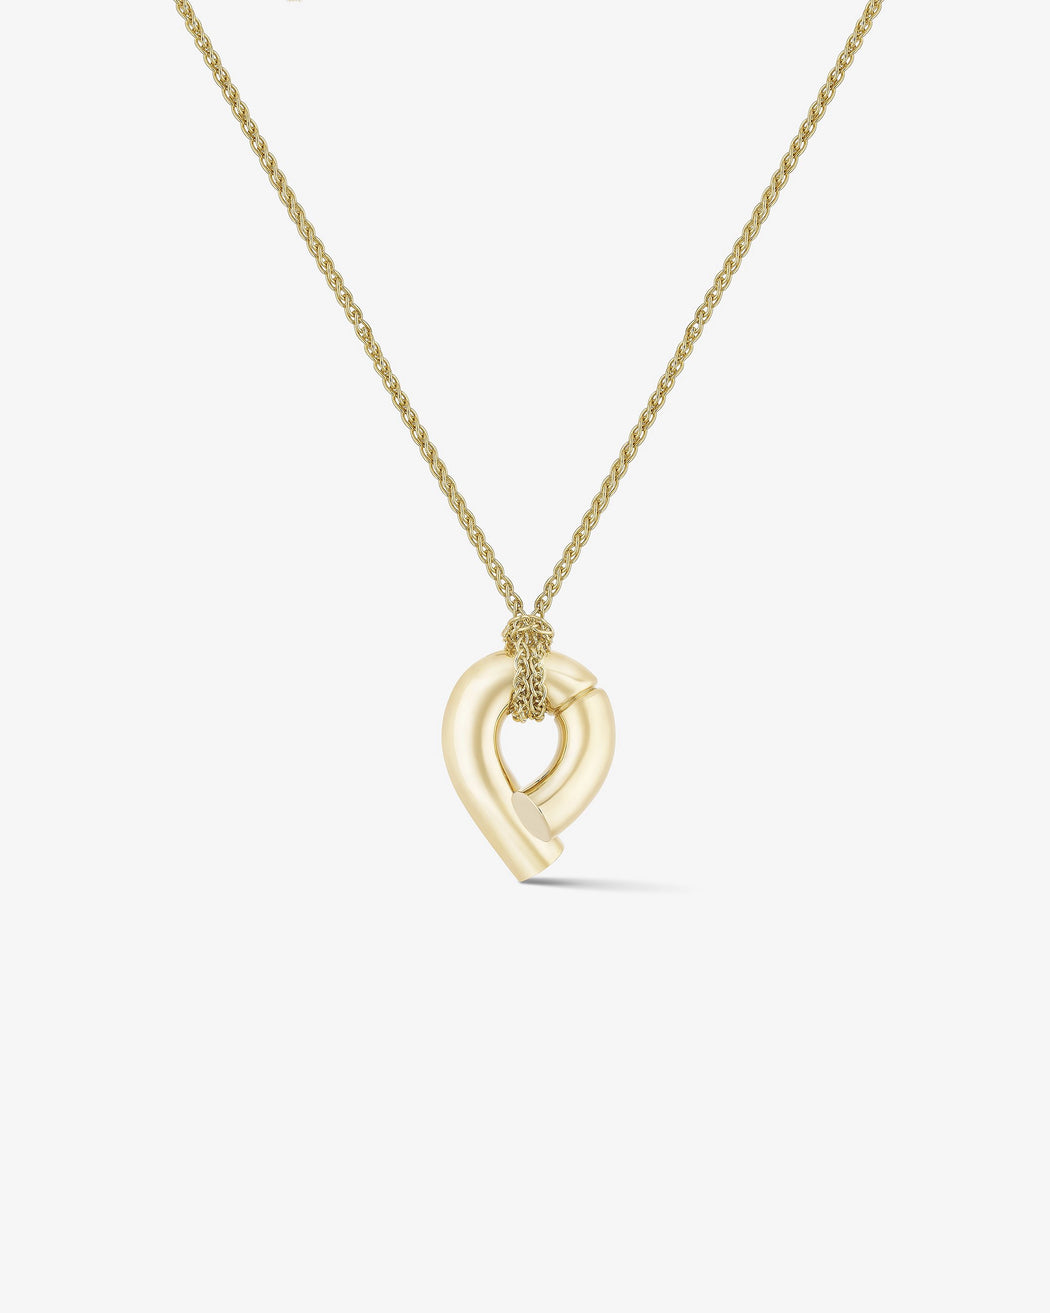 Oera pendant 18k Fairmined yellow gold, Tabayer ethical fine jewelry